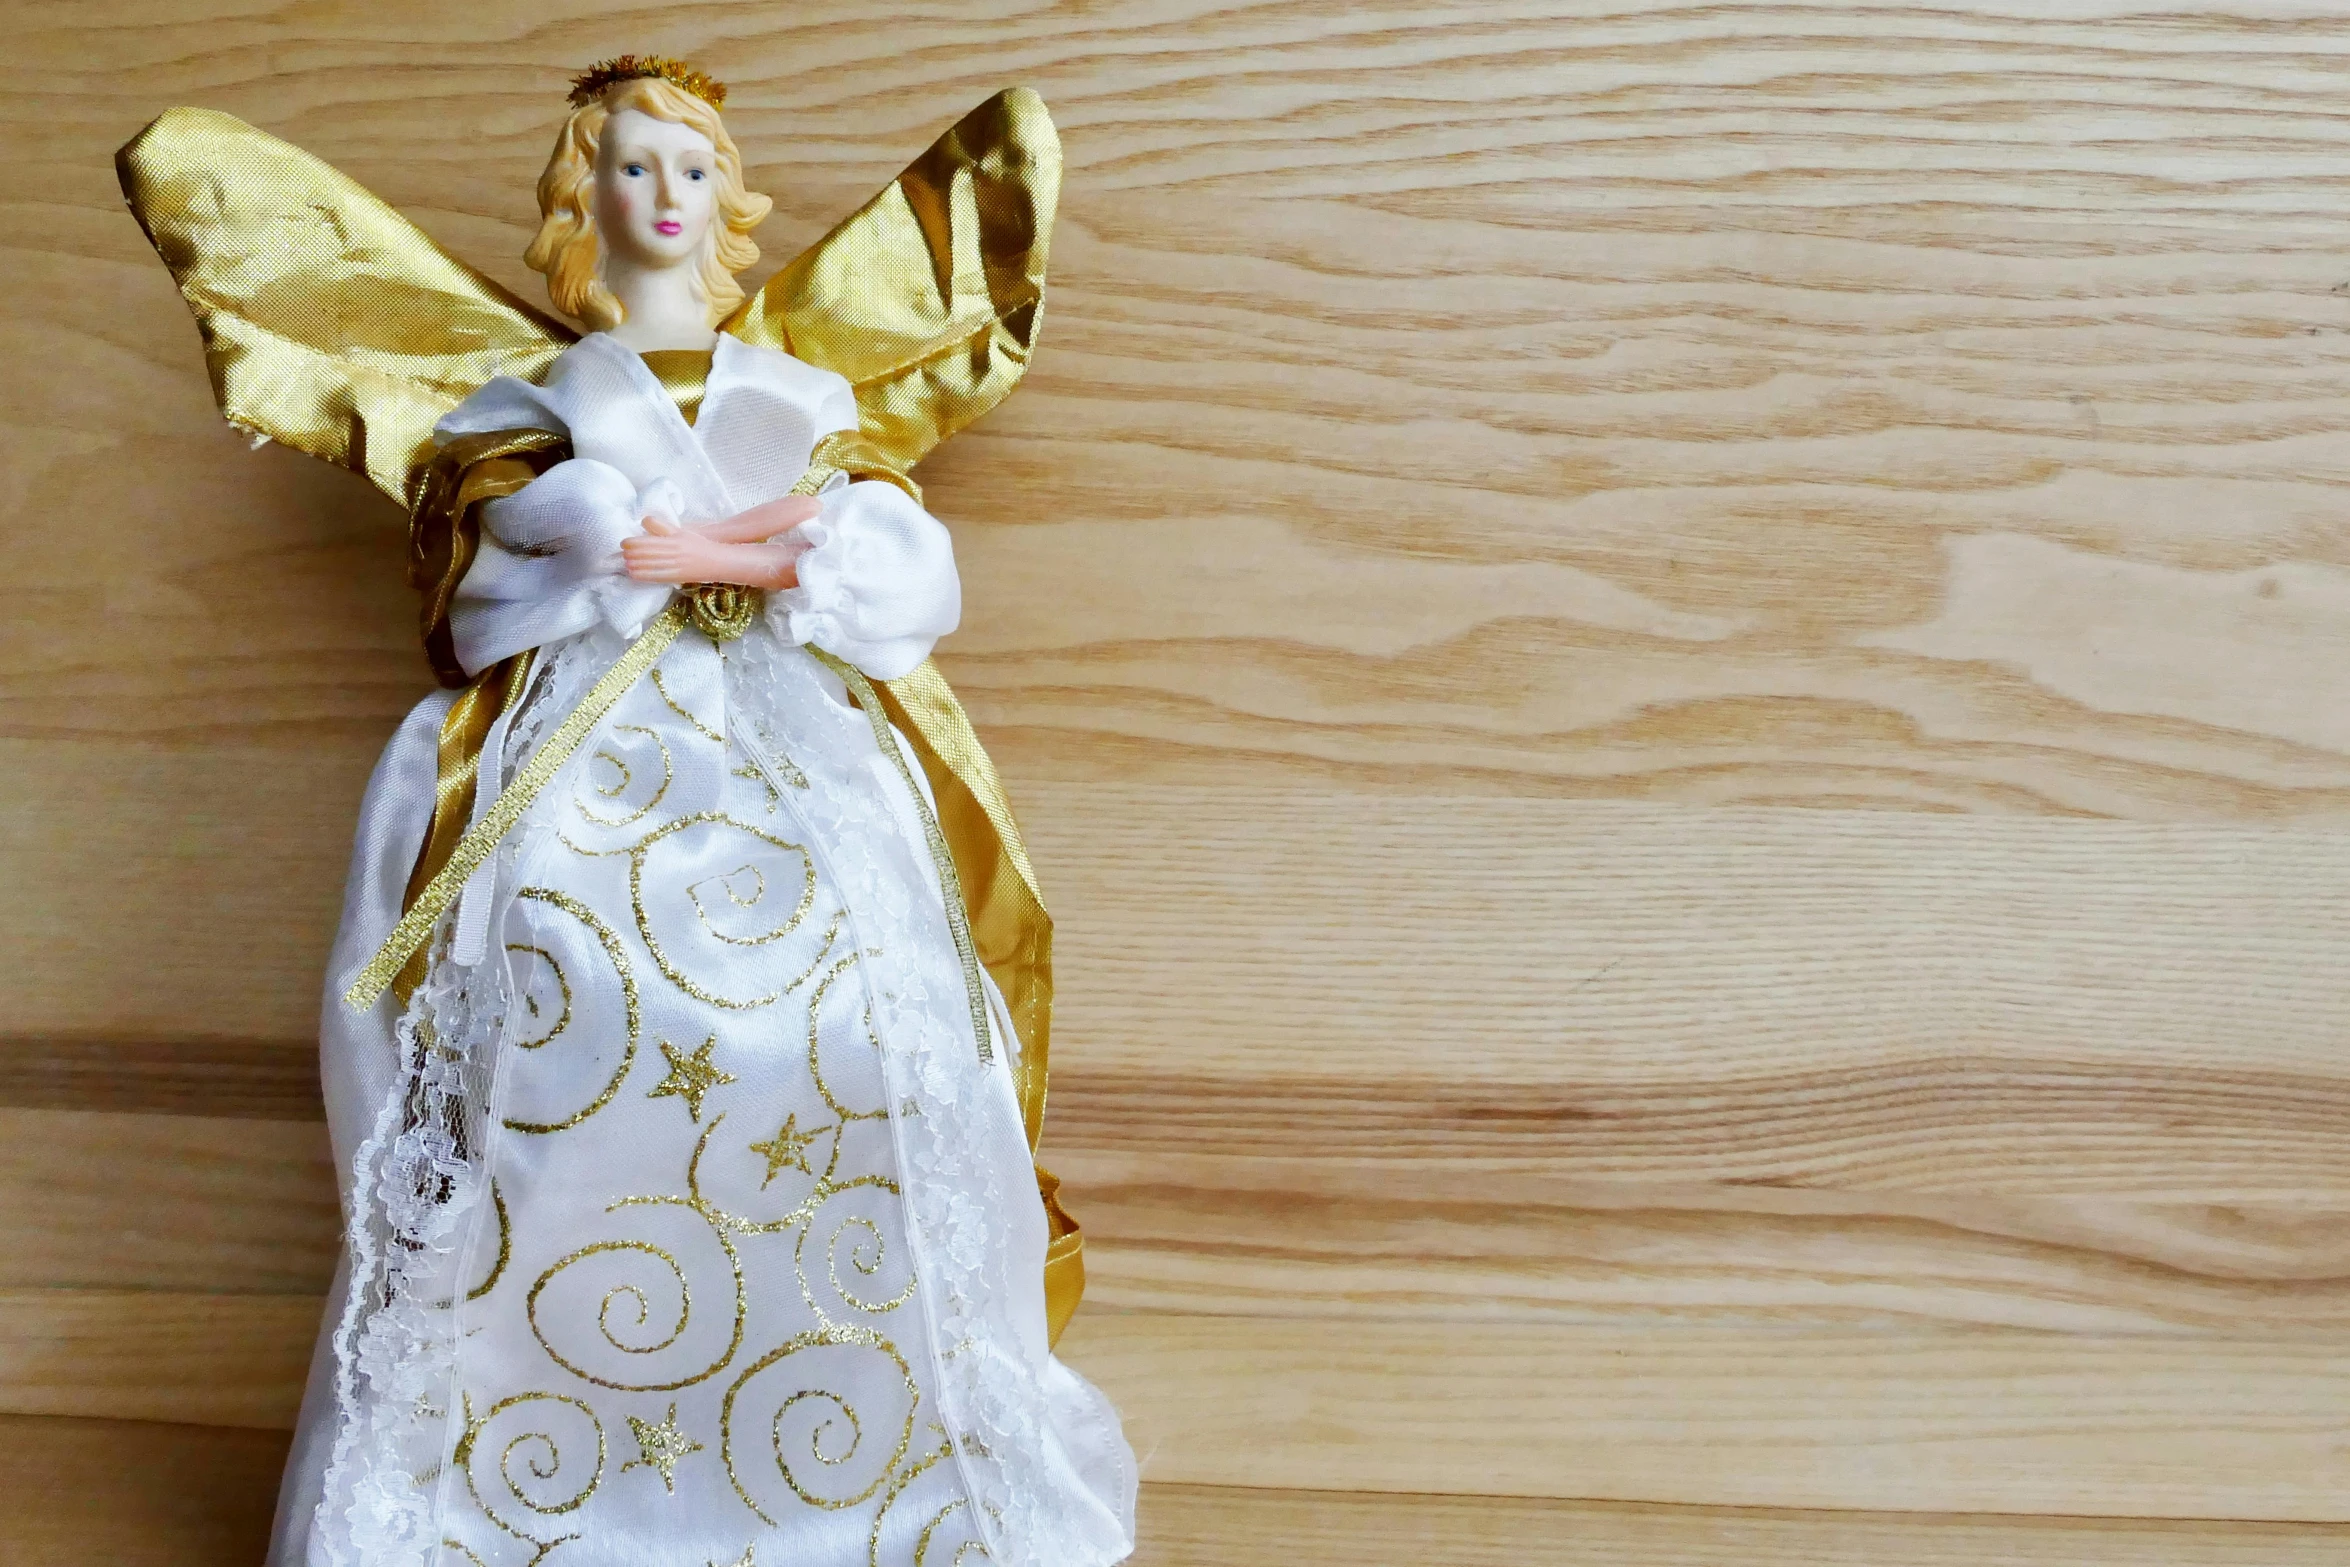 a close up of a figurine on a wooden surface, by Marie Angel, pexels, renaissance, wearing festive clothing, gold and white, gif, full figure